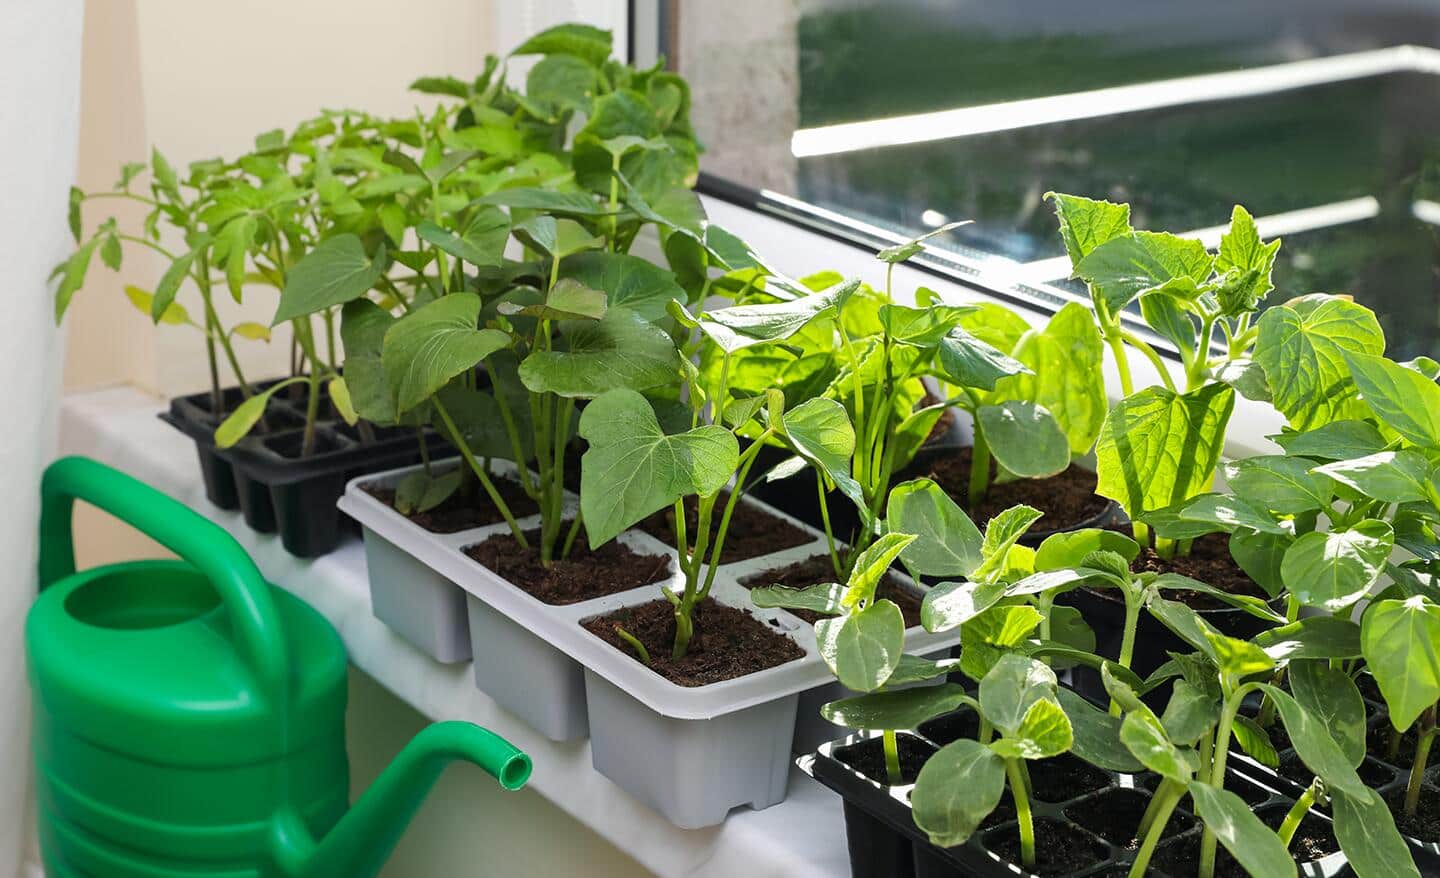 Packs of seedlings in a window with a watering can